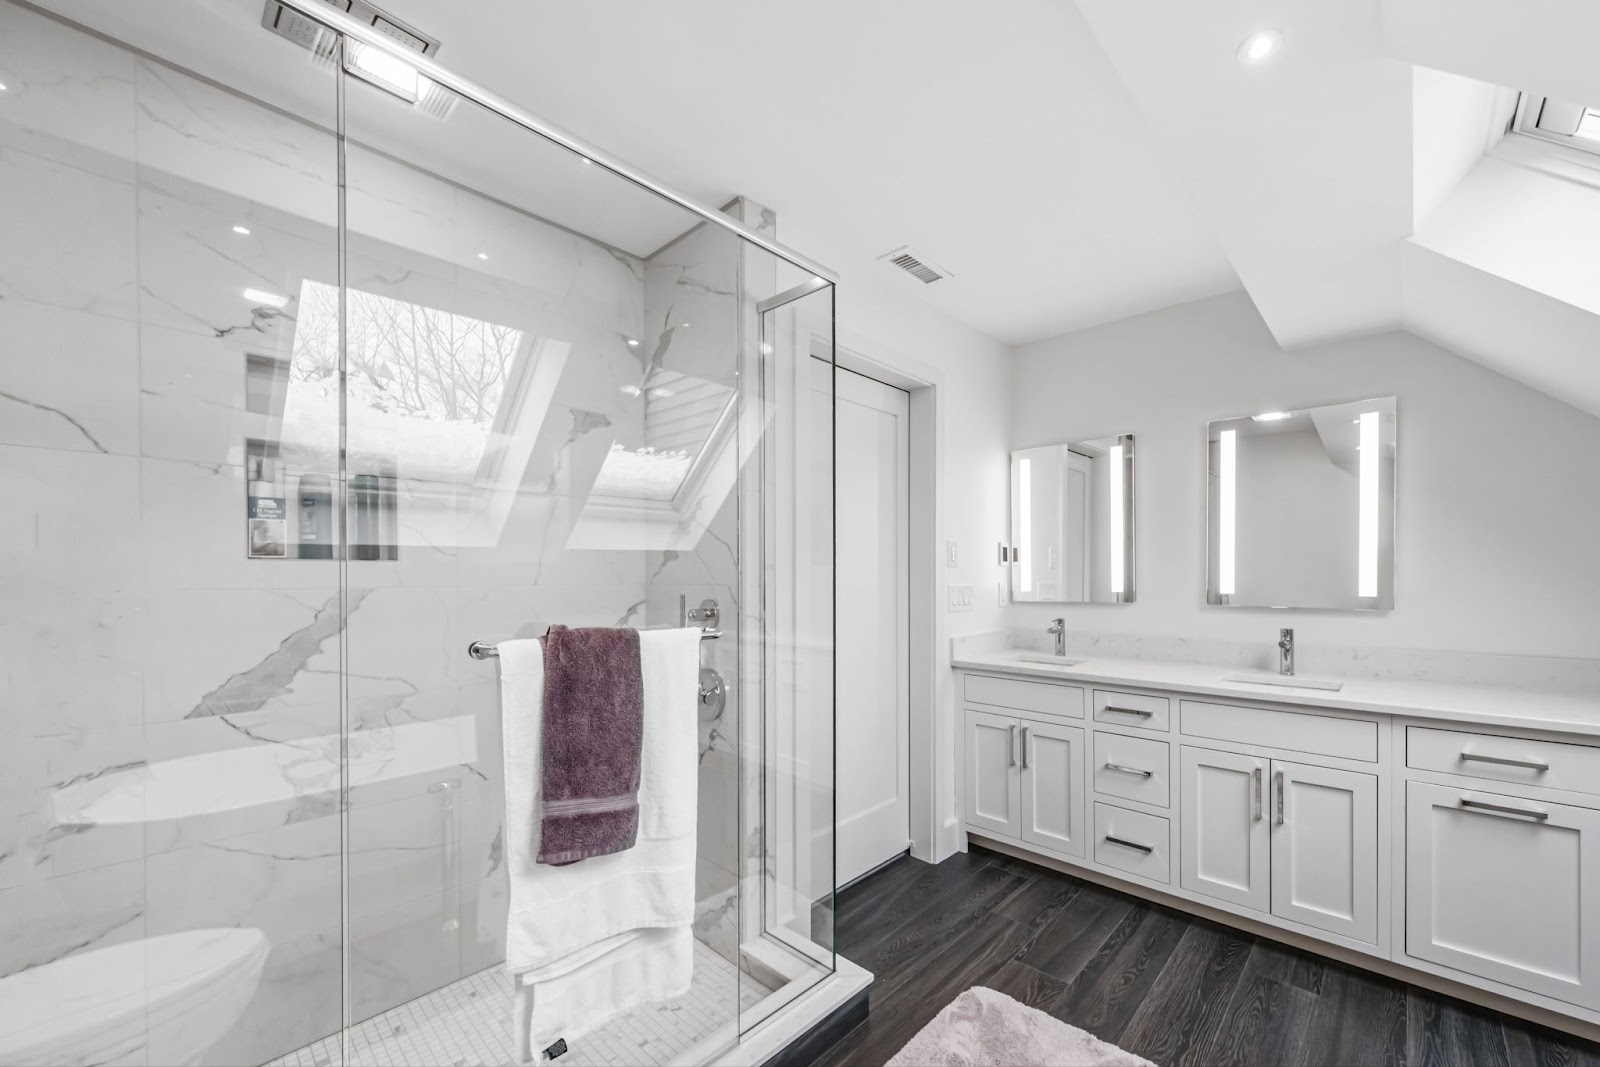 A modern white bathroom with glass partition, dual sinks, and mirrors with crisp white and brown towels hanging elegantly on the door handle.